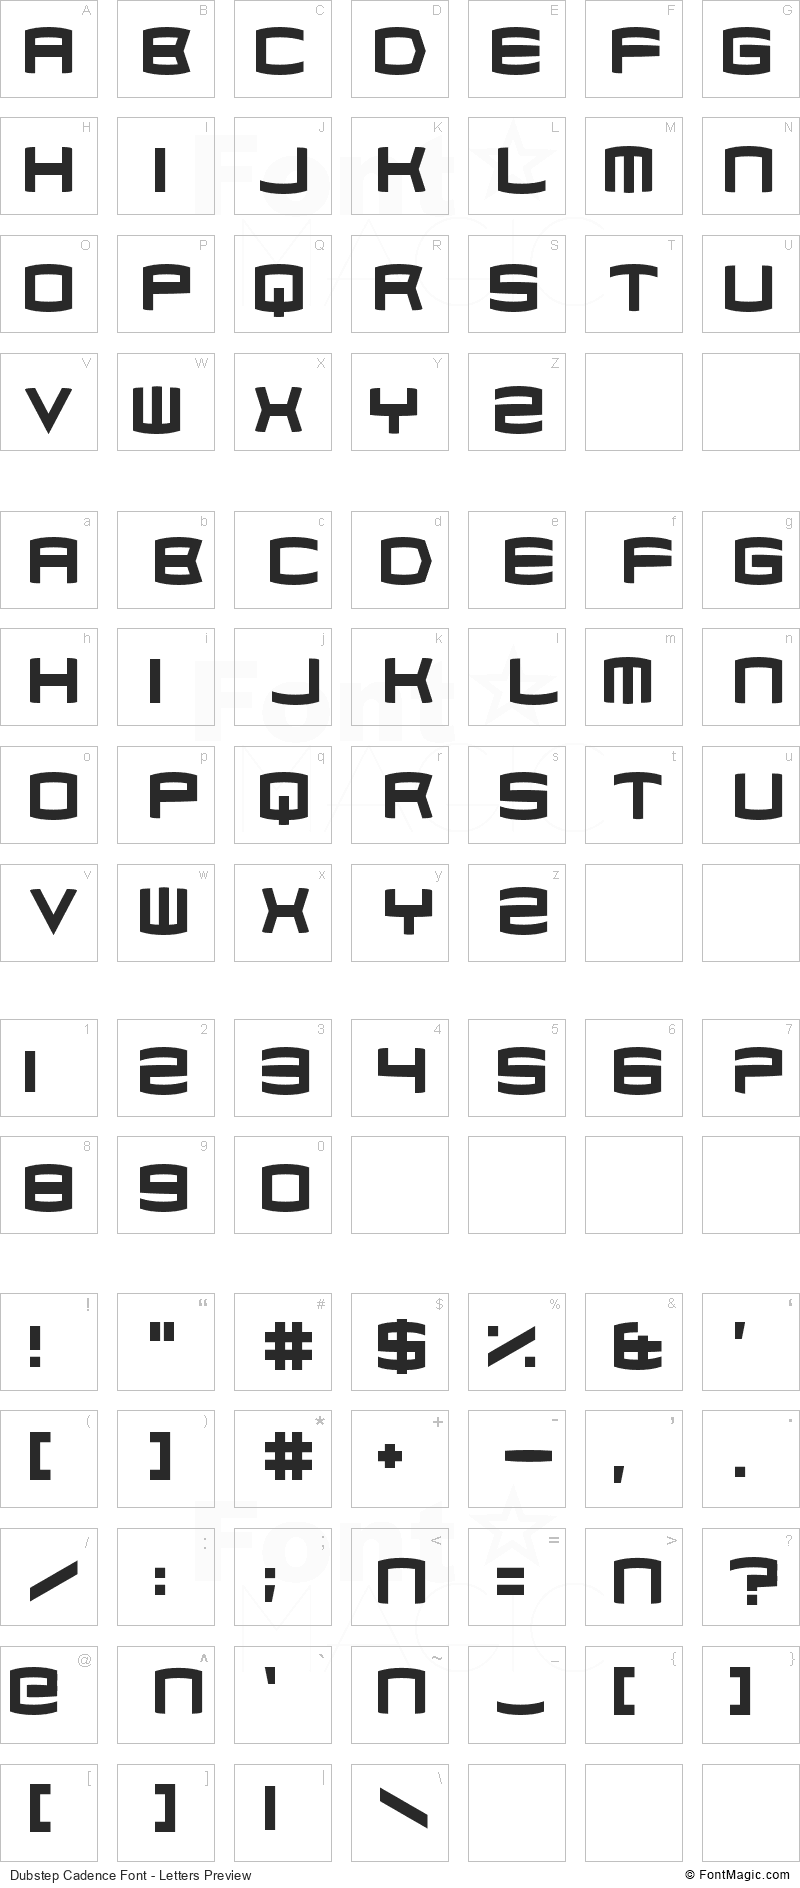 Dubstep Cadence Font - All Latters Preview Chart